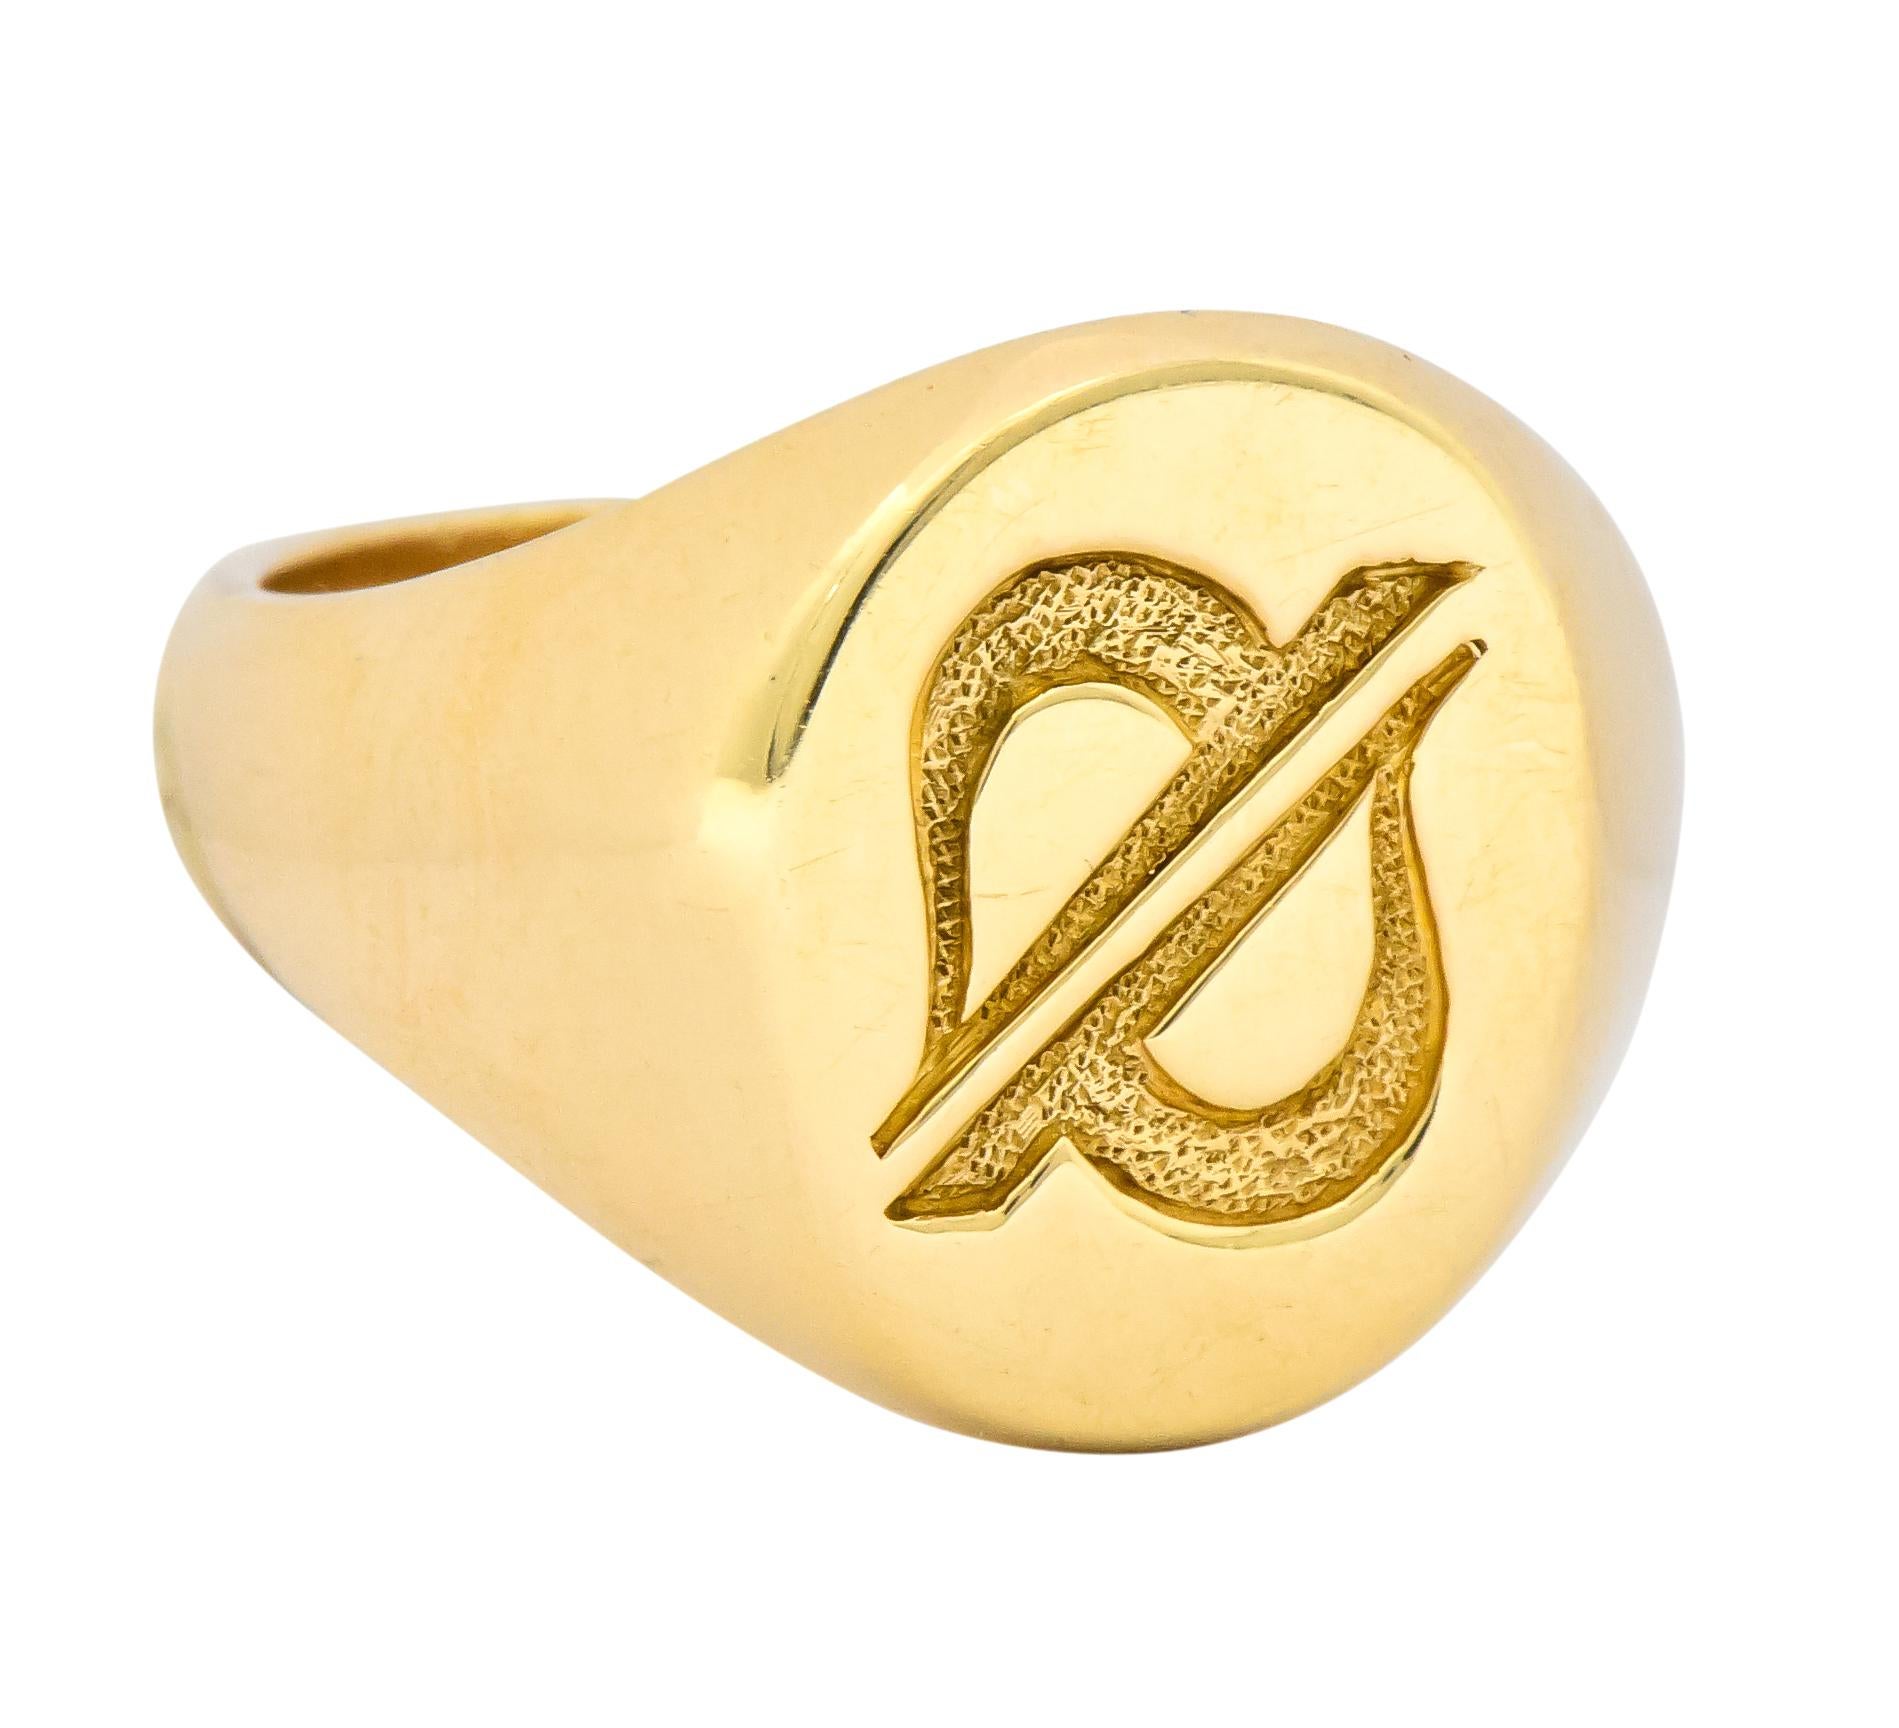 Classic signet style ring featuring a high polished finish and an deeply engraved oval head 

Depicting a stylized zodiac sign for Cancer completed by a stippled texture 

Fully signed Tiffany & Co. and stamped 14k for 14 karat gold 

Circa: